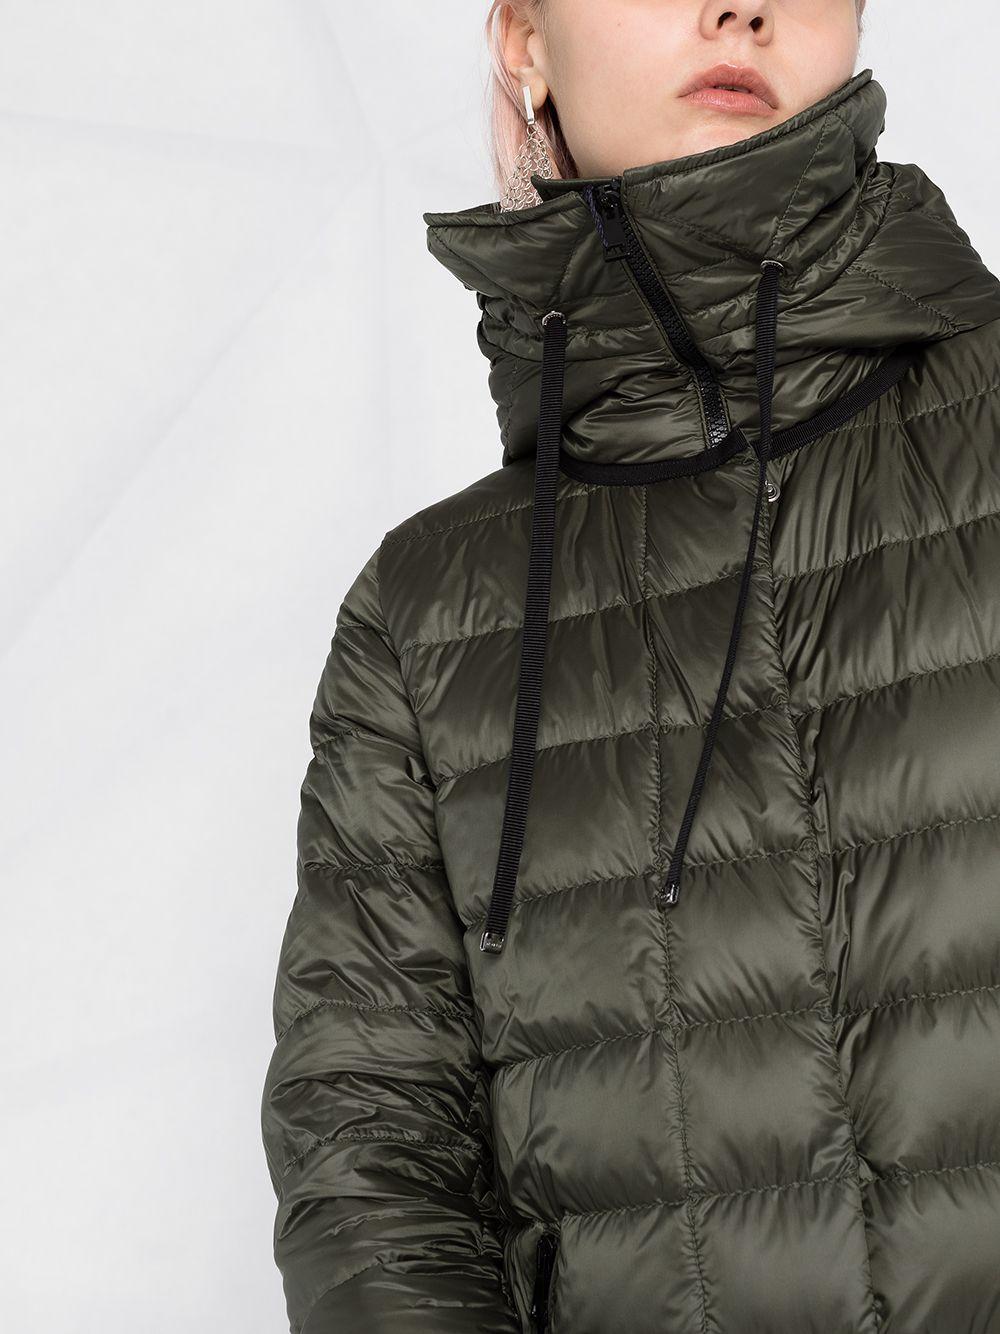 Moncler Gnosia Padded Parka Coat in Green | Lyst